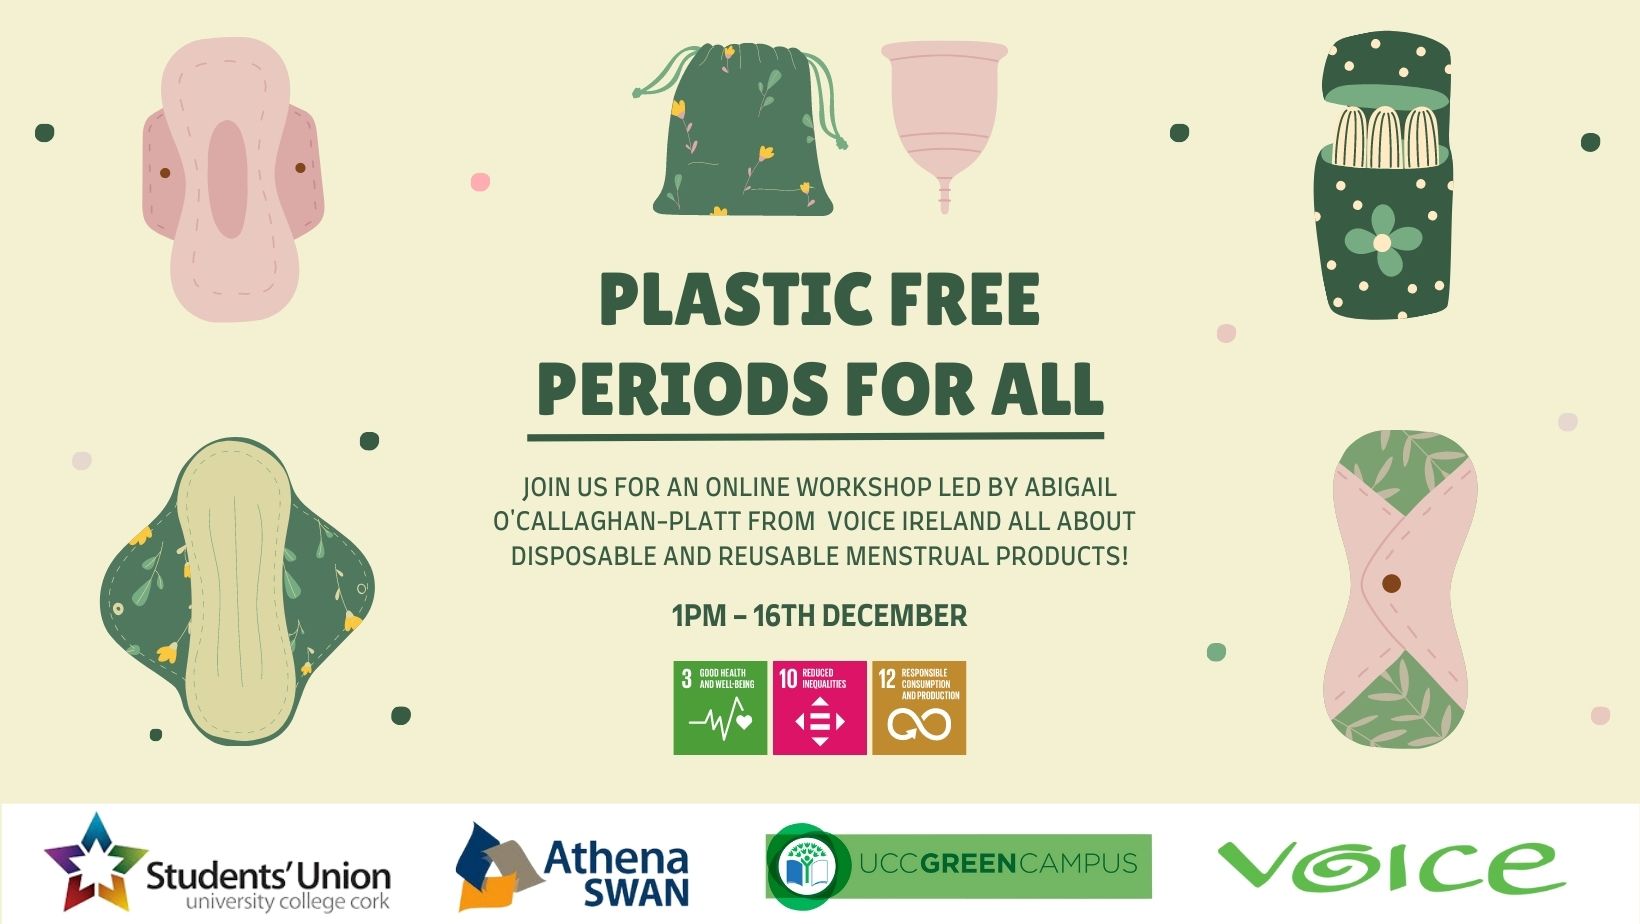 Online workshop about disposable and reusable menstrual products. 